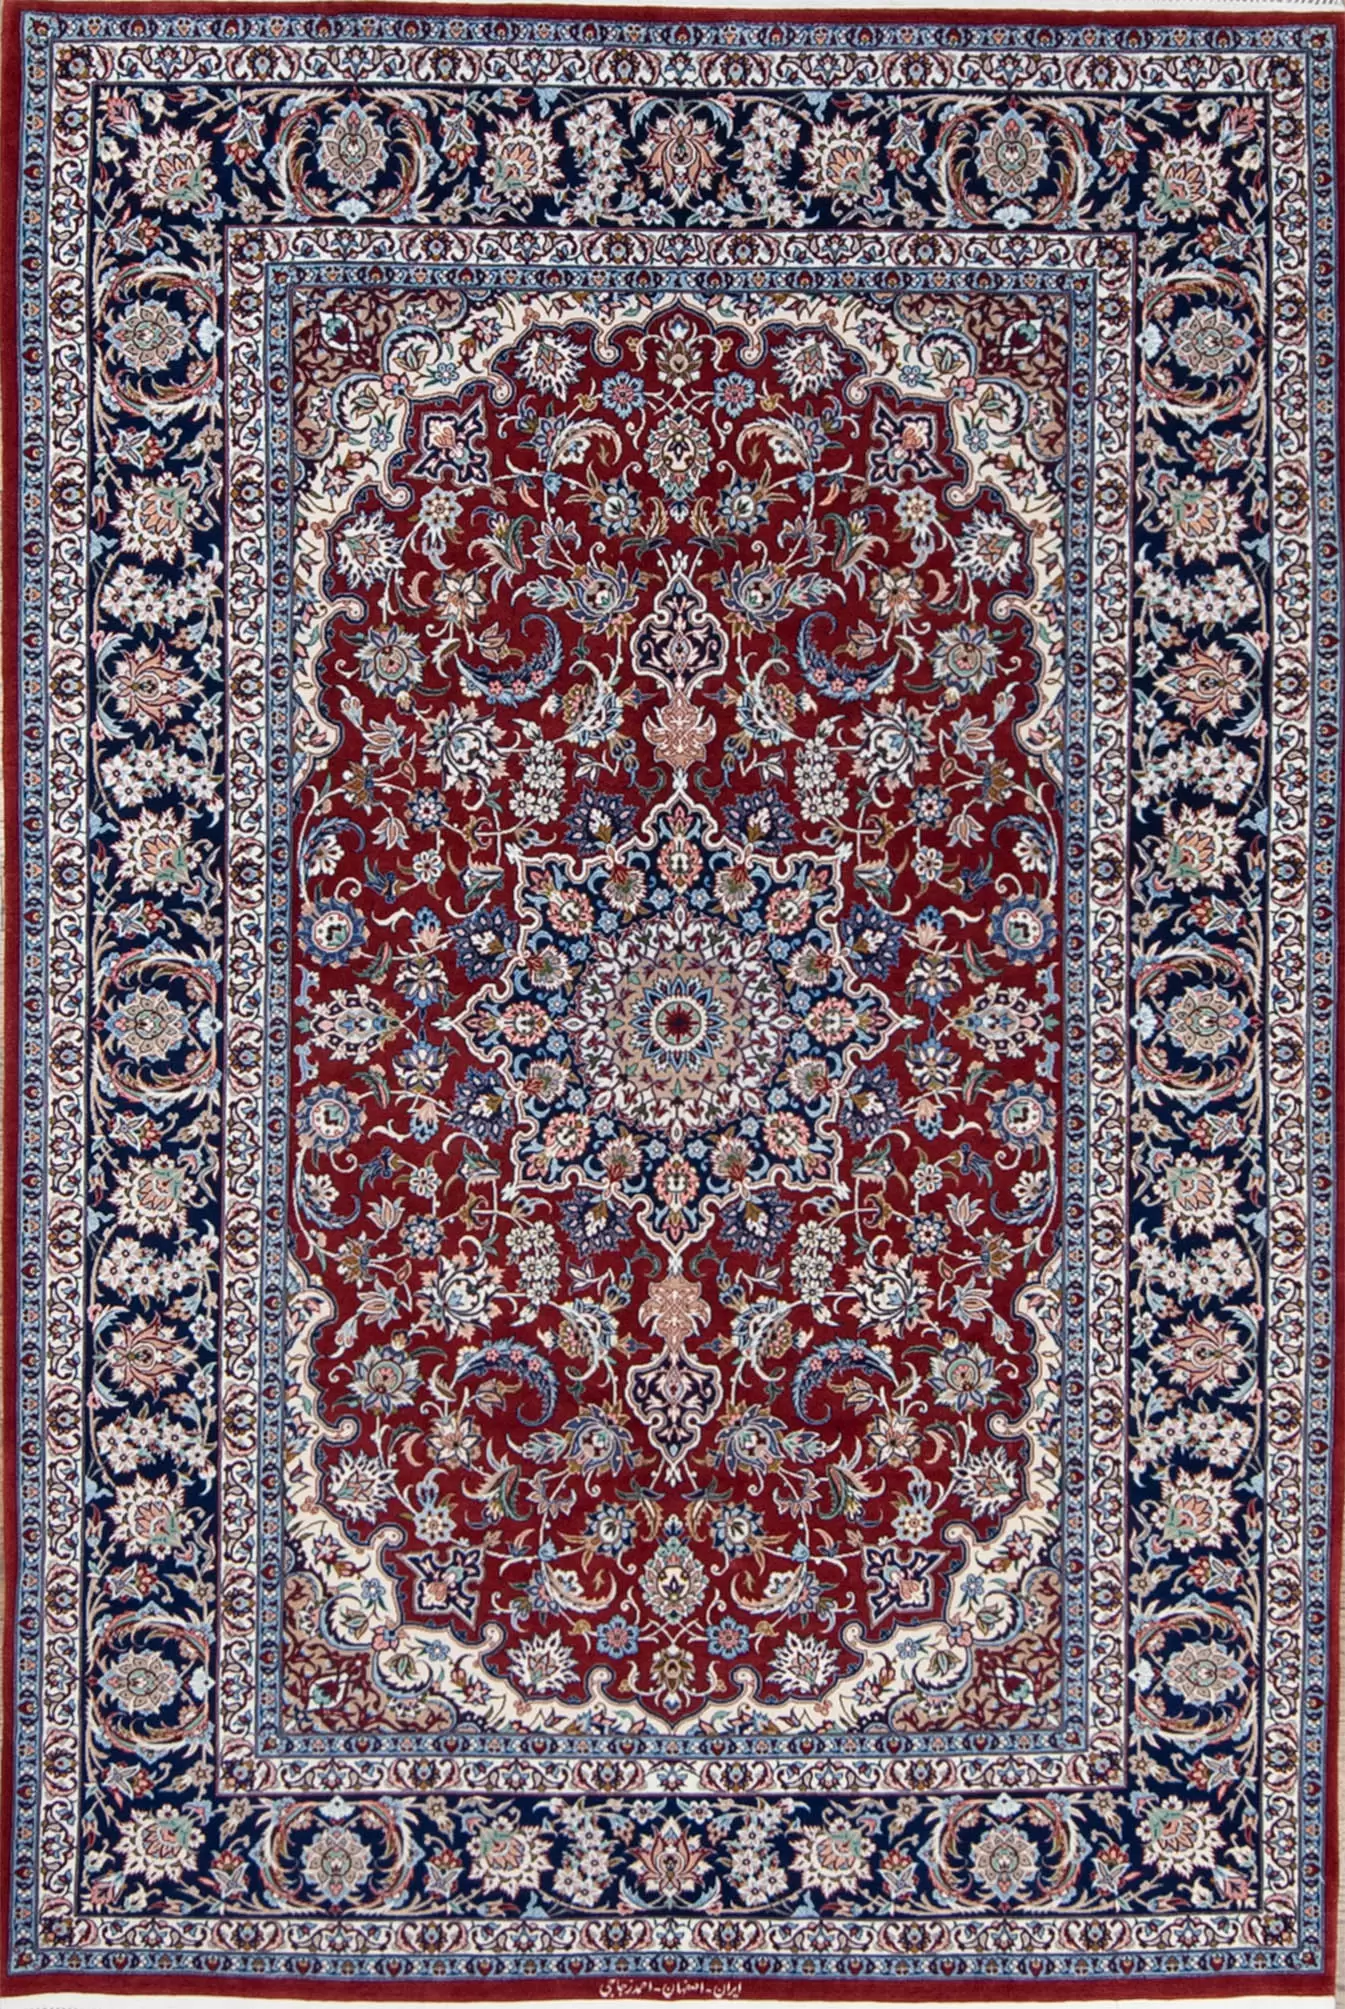 Vegetable dye rugs, Authentic hand knotted floral Persian Isfahan rug made of kork wool and silk. Size 4.9x7.